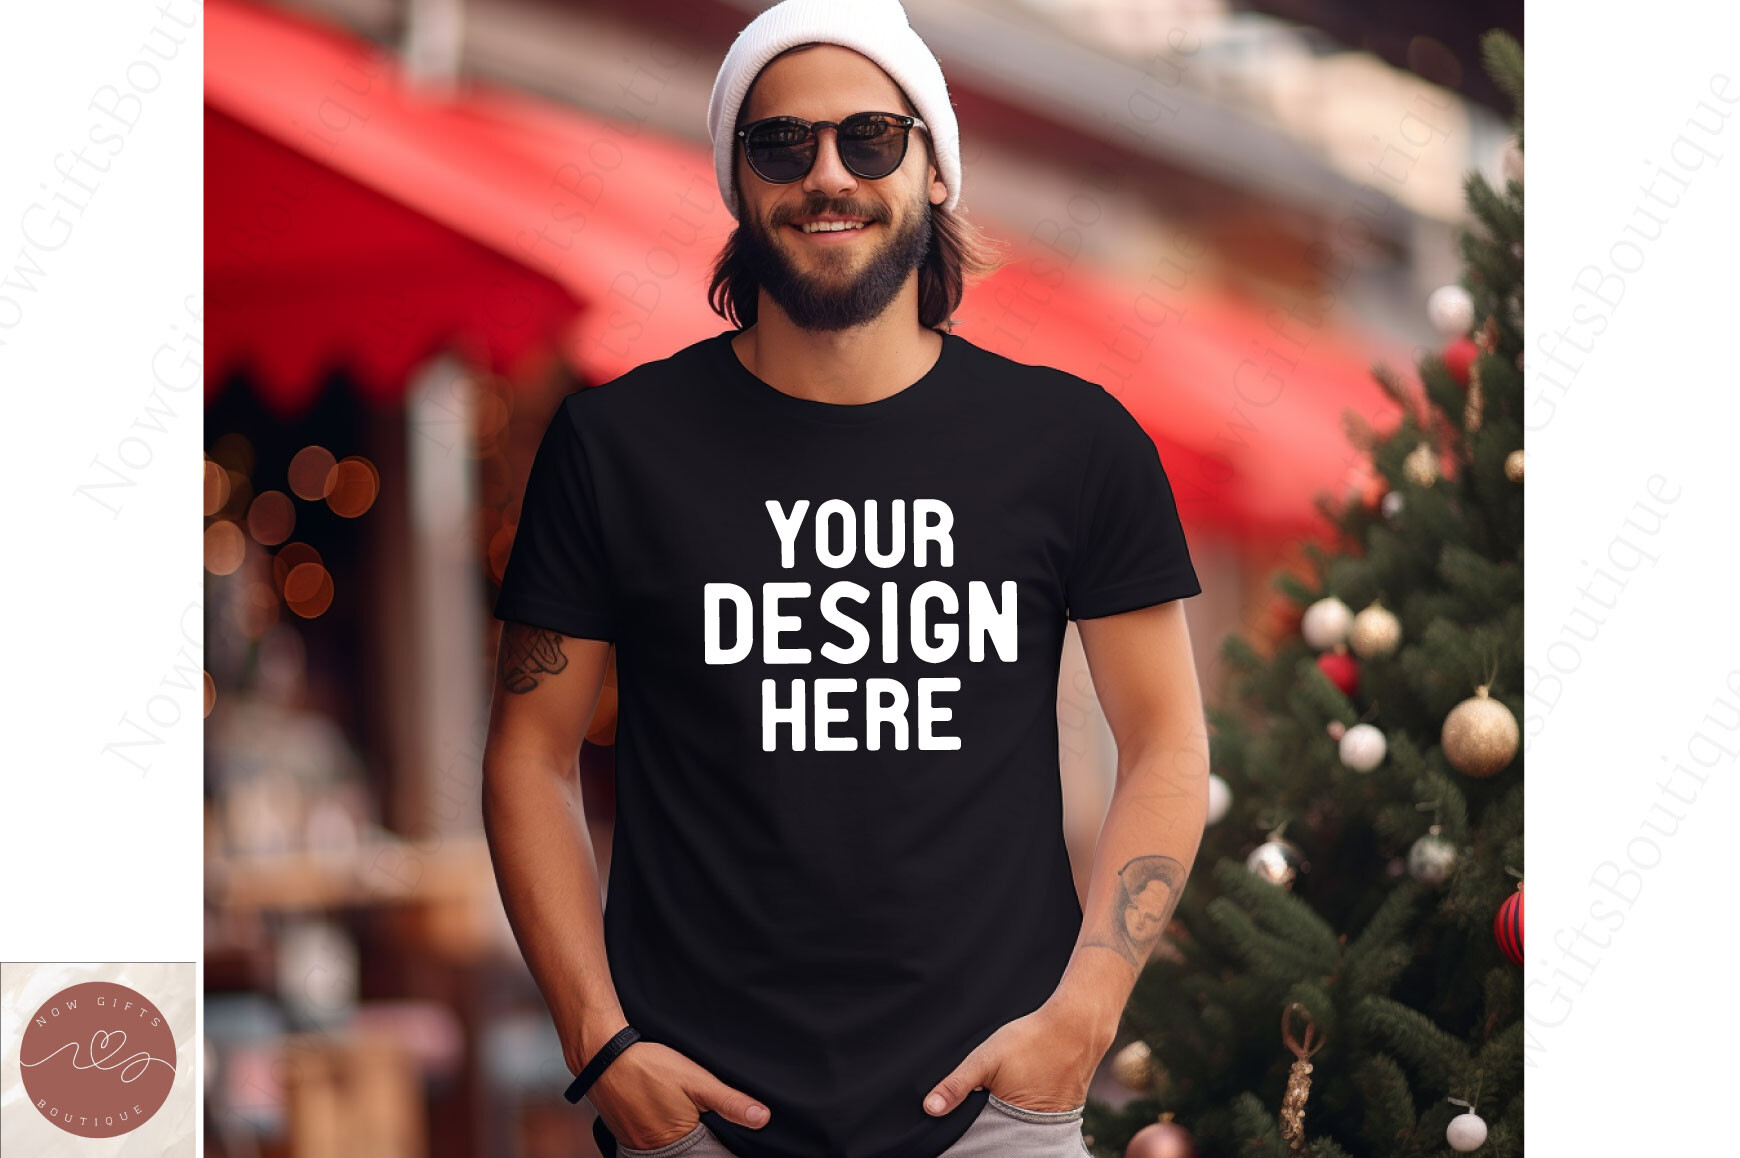 Black Gildan 64000 Mens T-Shirt Mockup Graphic by NowGiftsBoutique ...